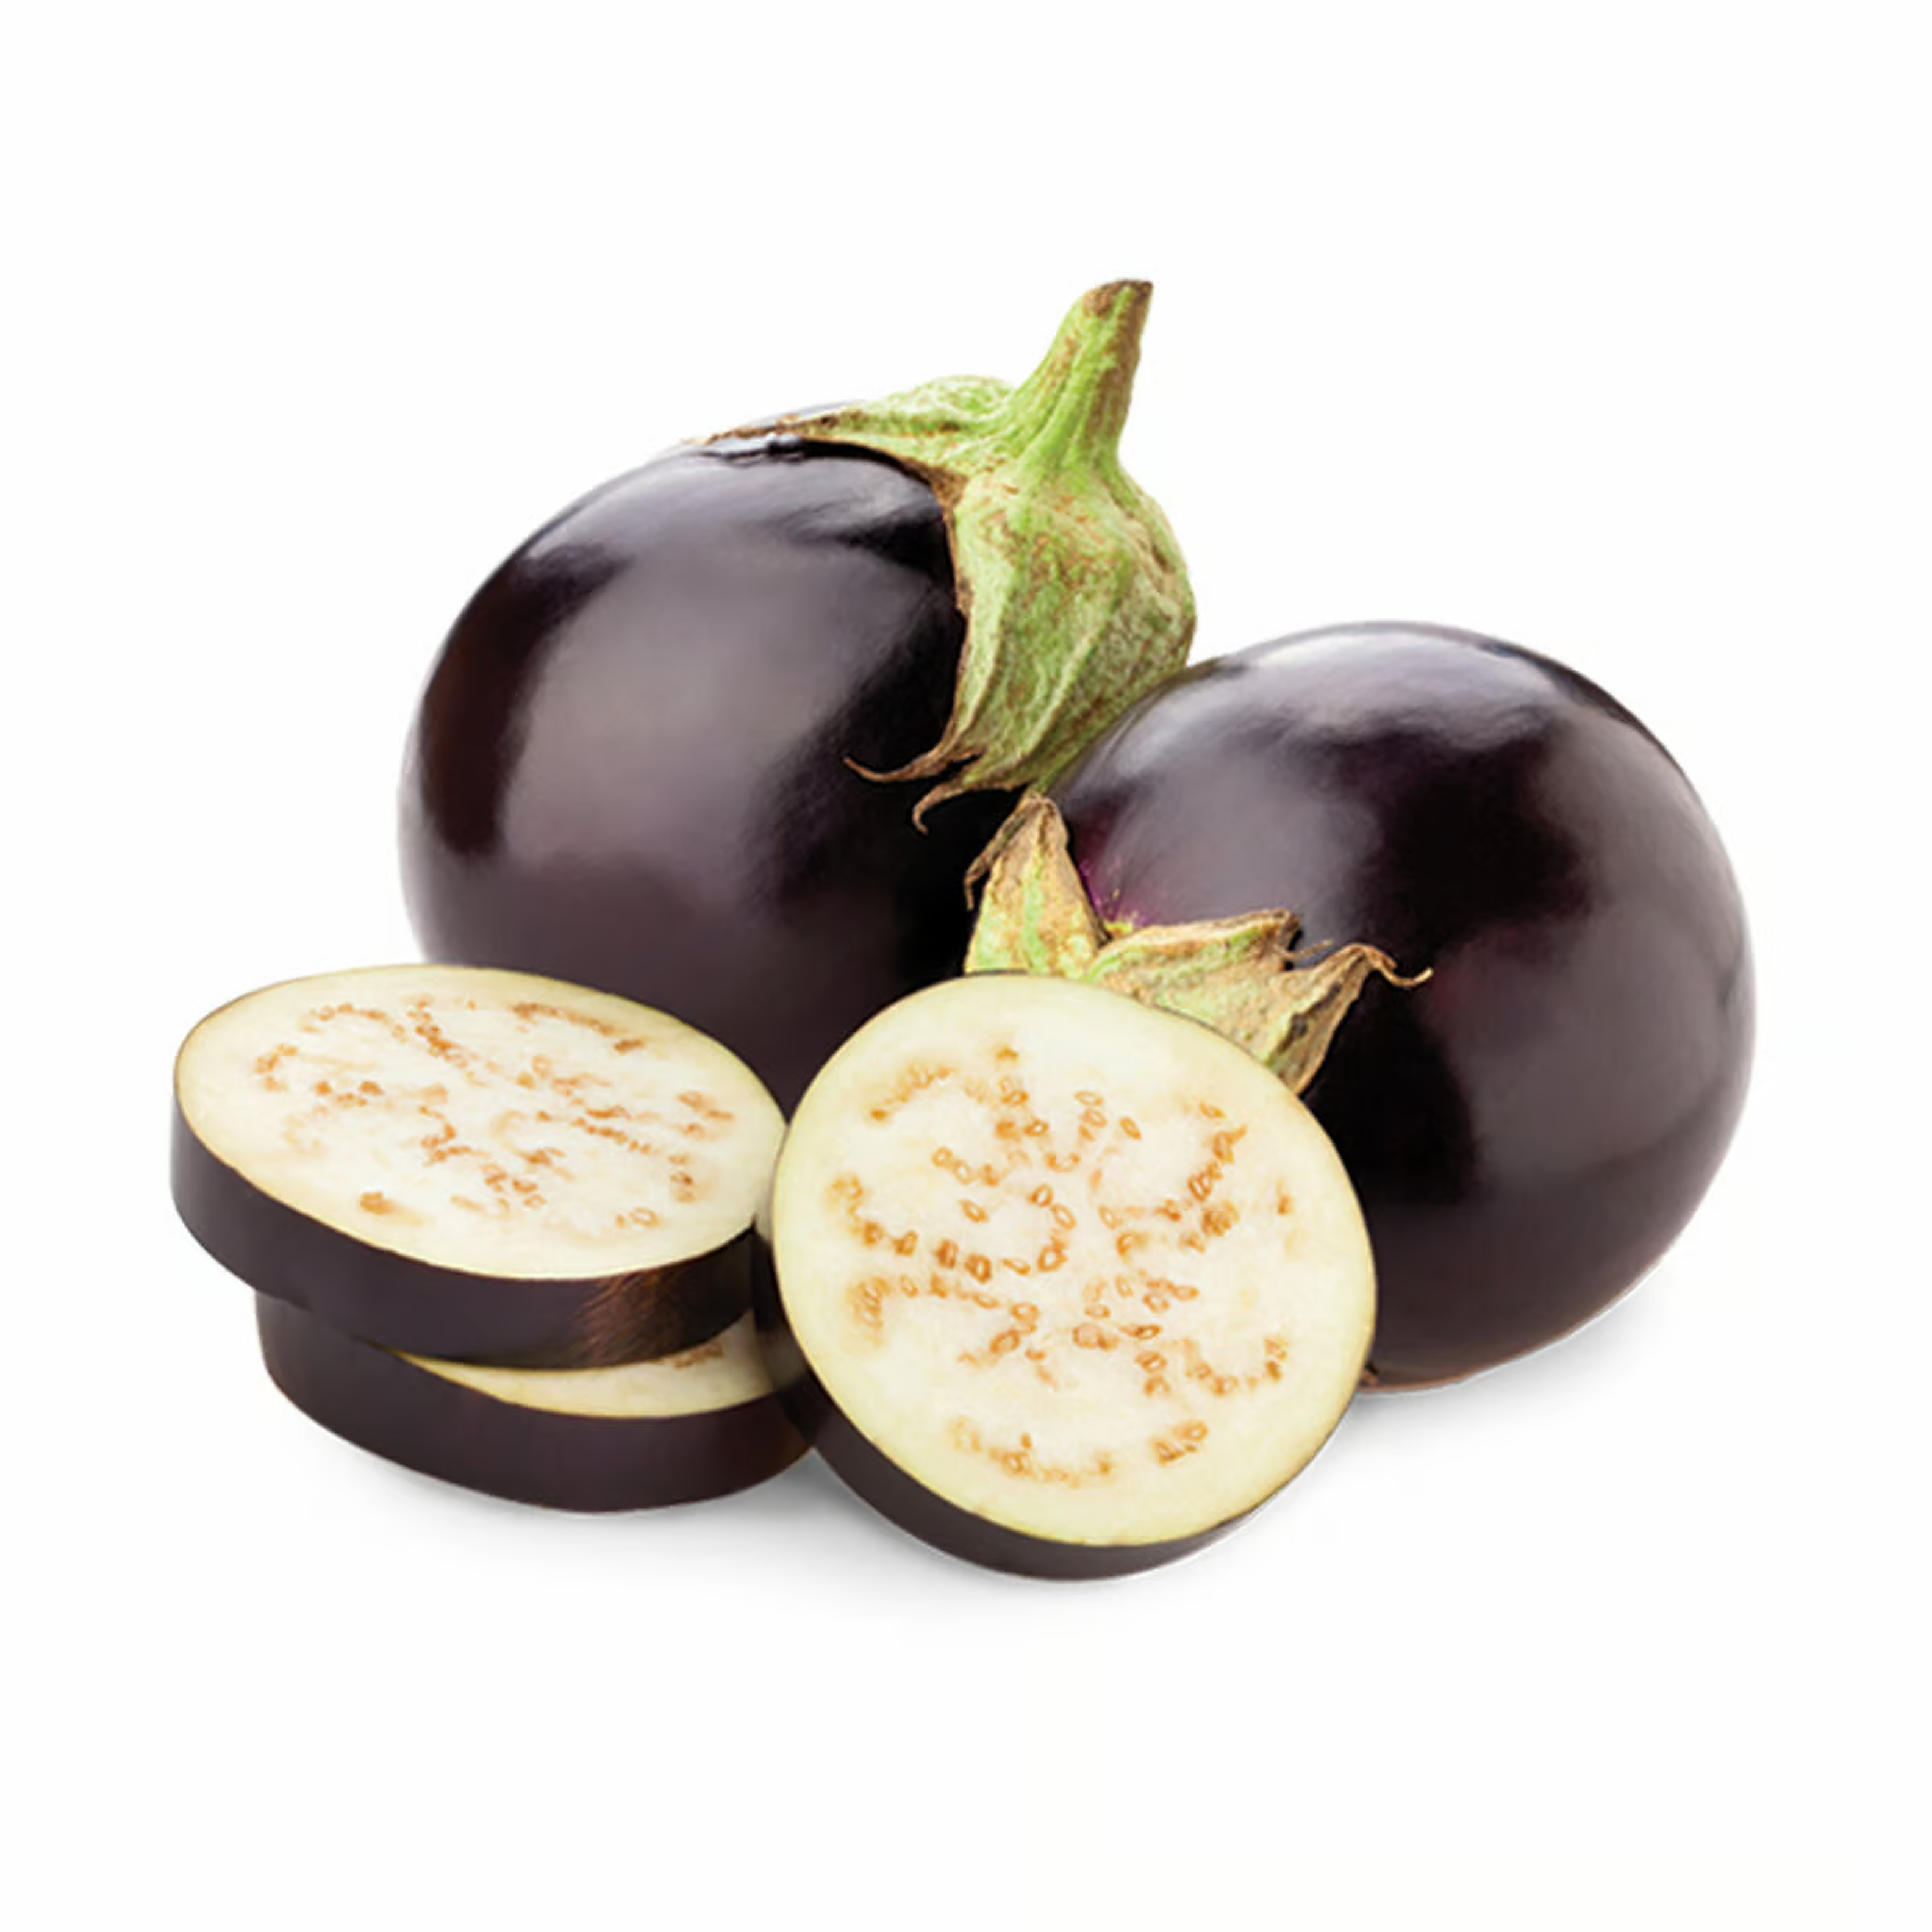 Black Round Eggplant variety from Royal Seed